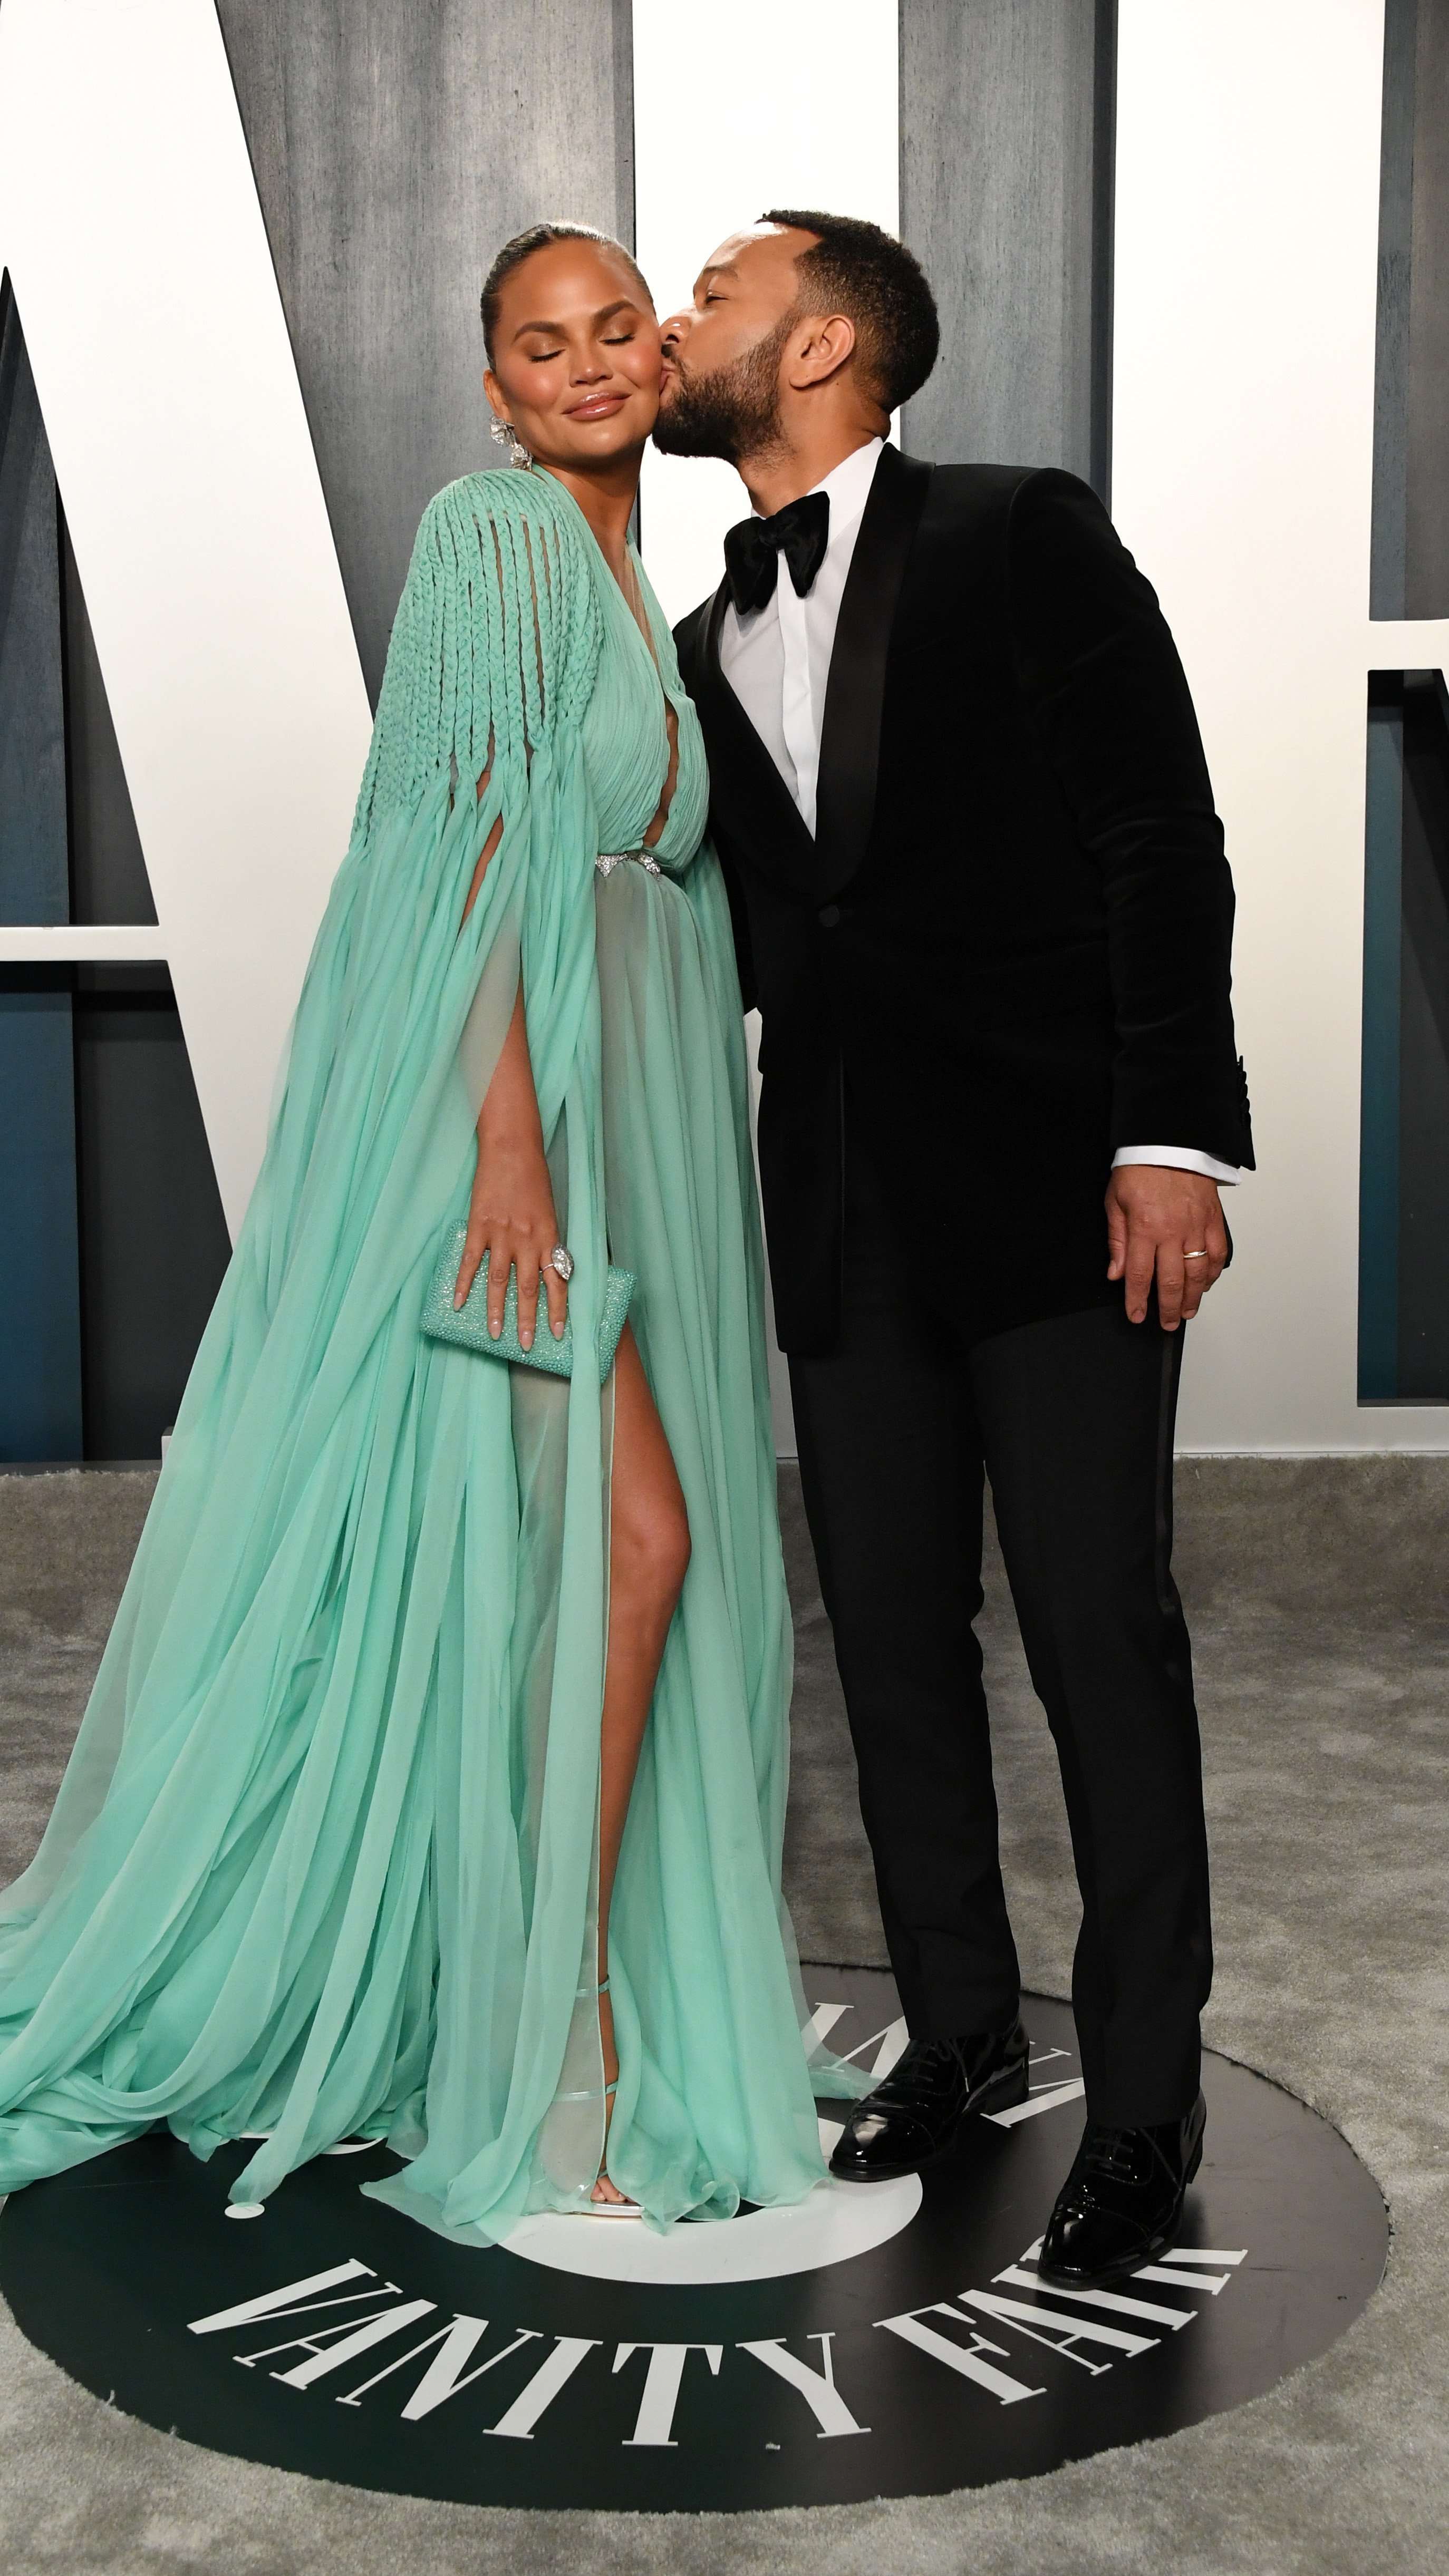 Chrissy Teigen and John Legend attend the 2020 Vanity Fair Oscar Party on February 09, 2020 in Beverly Hills, California. | Source: Getty Images